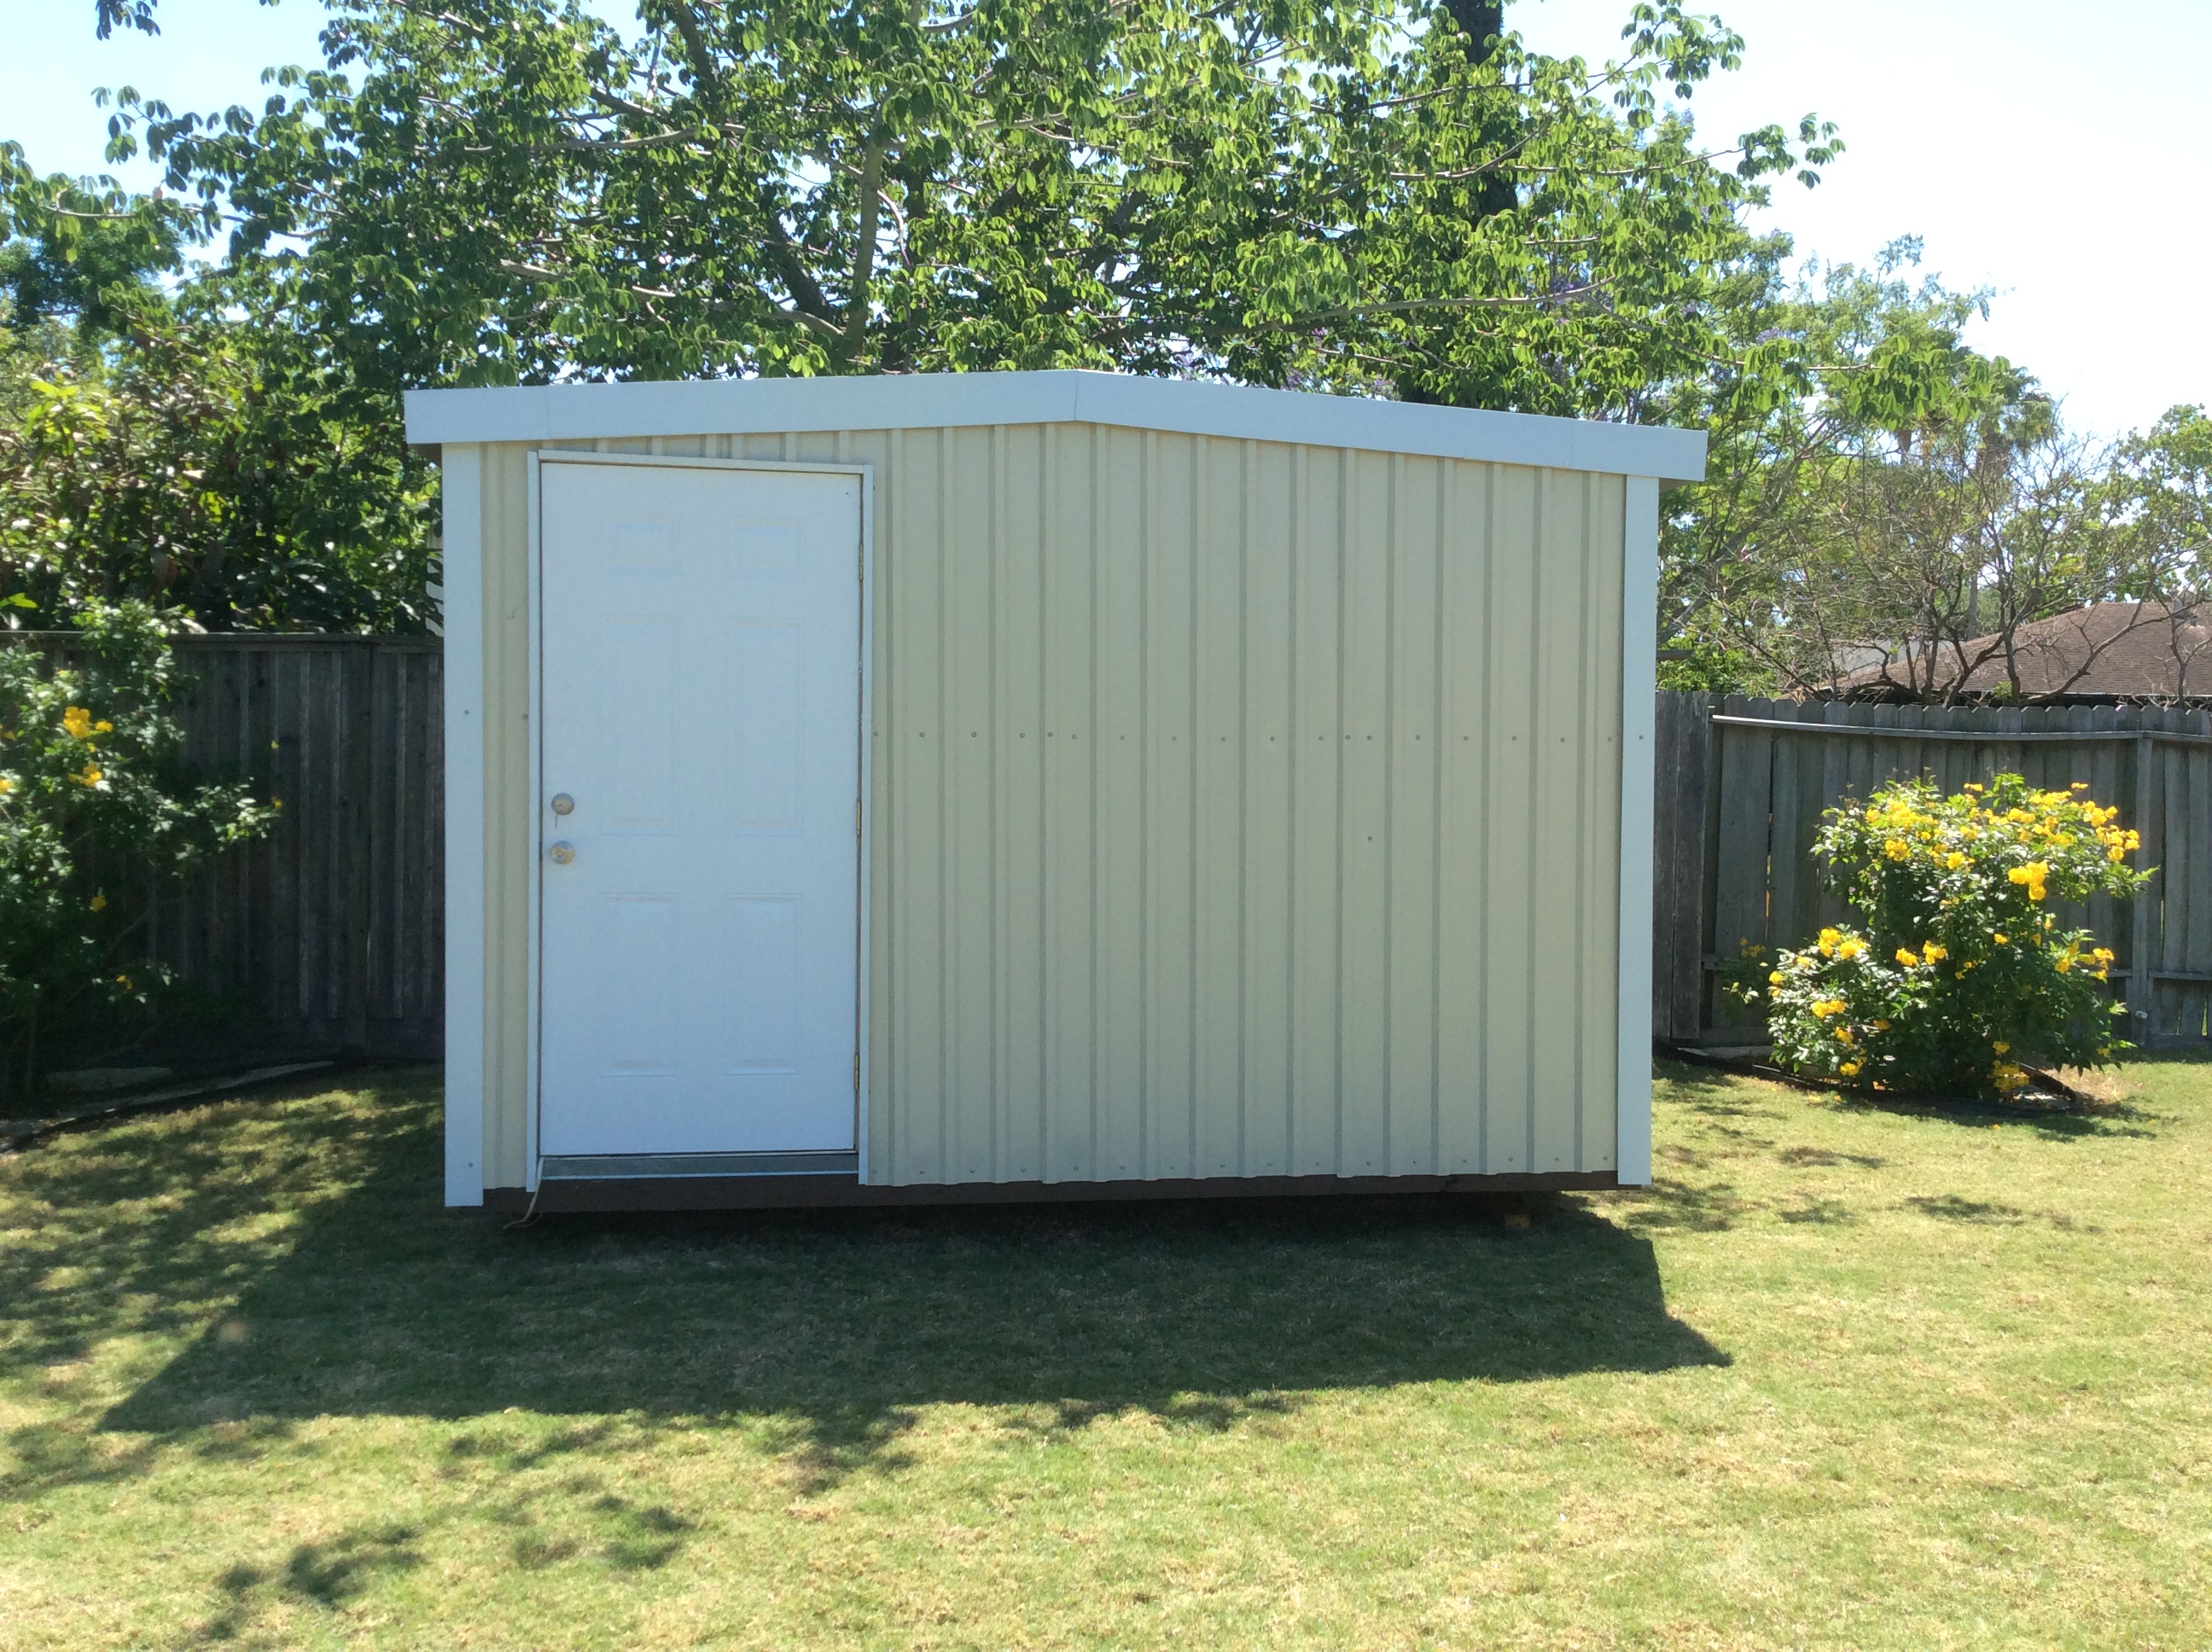 Used Portable Buildings For Sale Near Me - Corpus Christi Shed Mover2592 x 1936